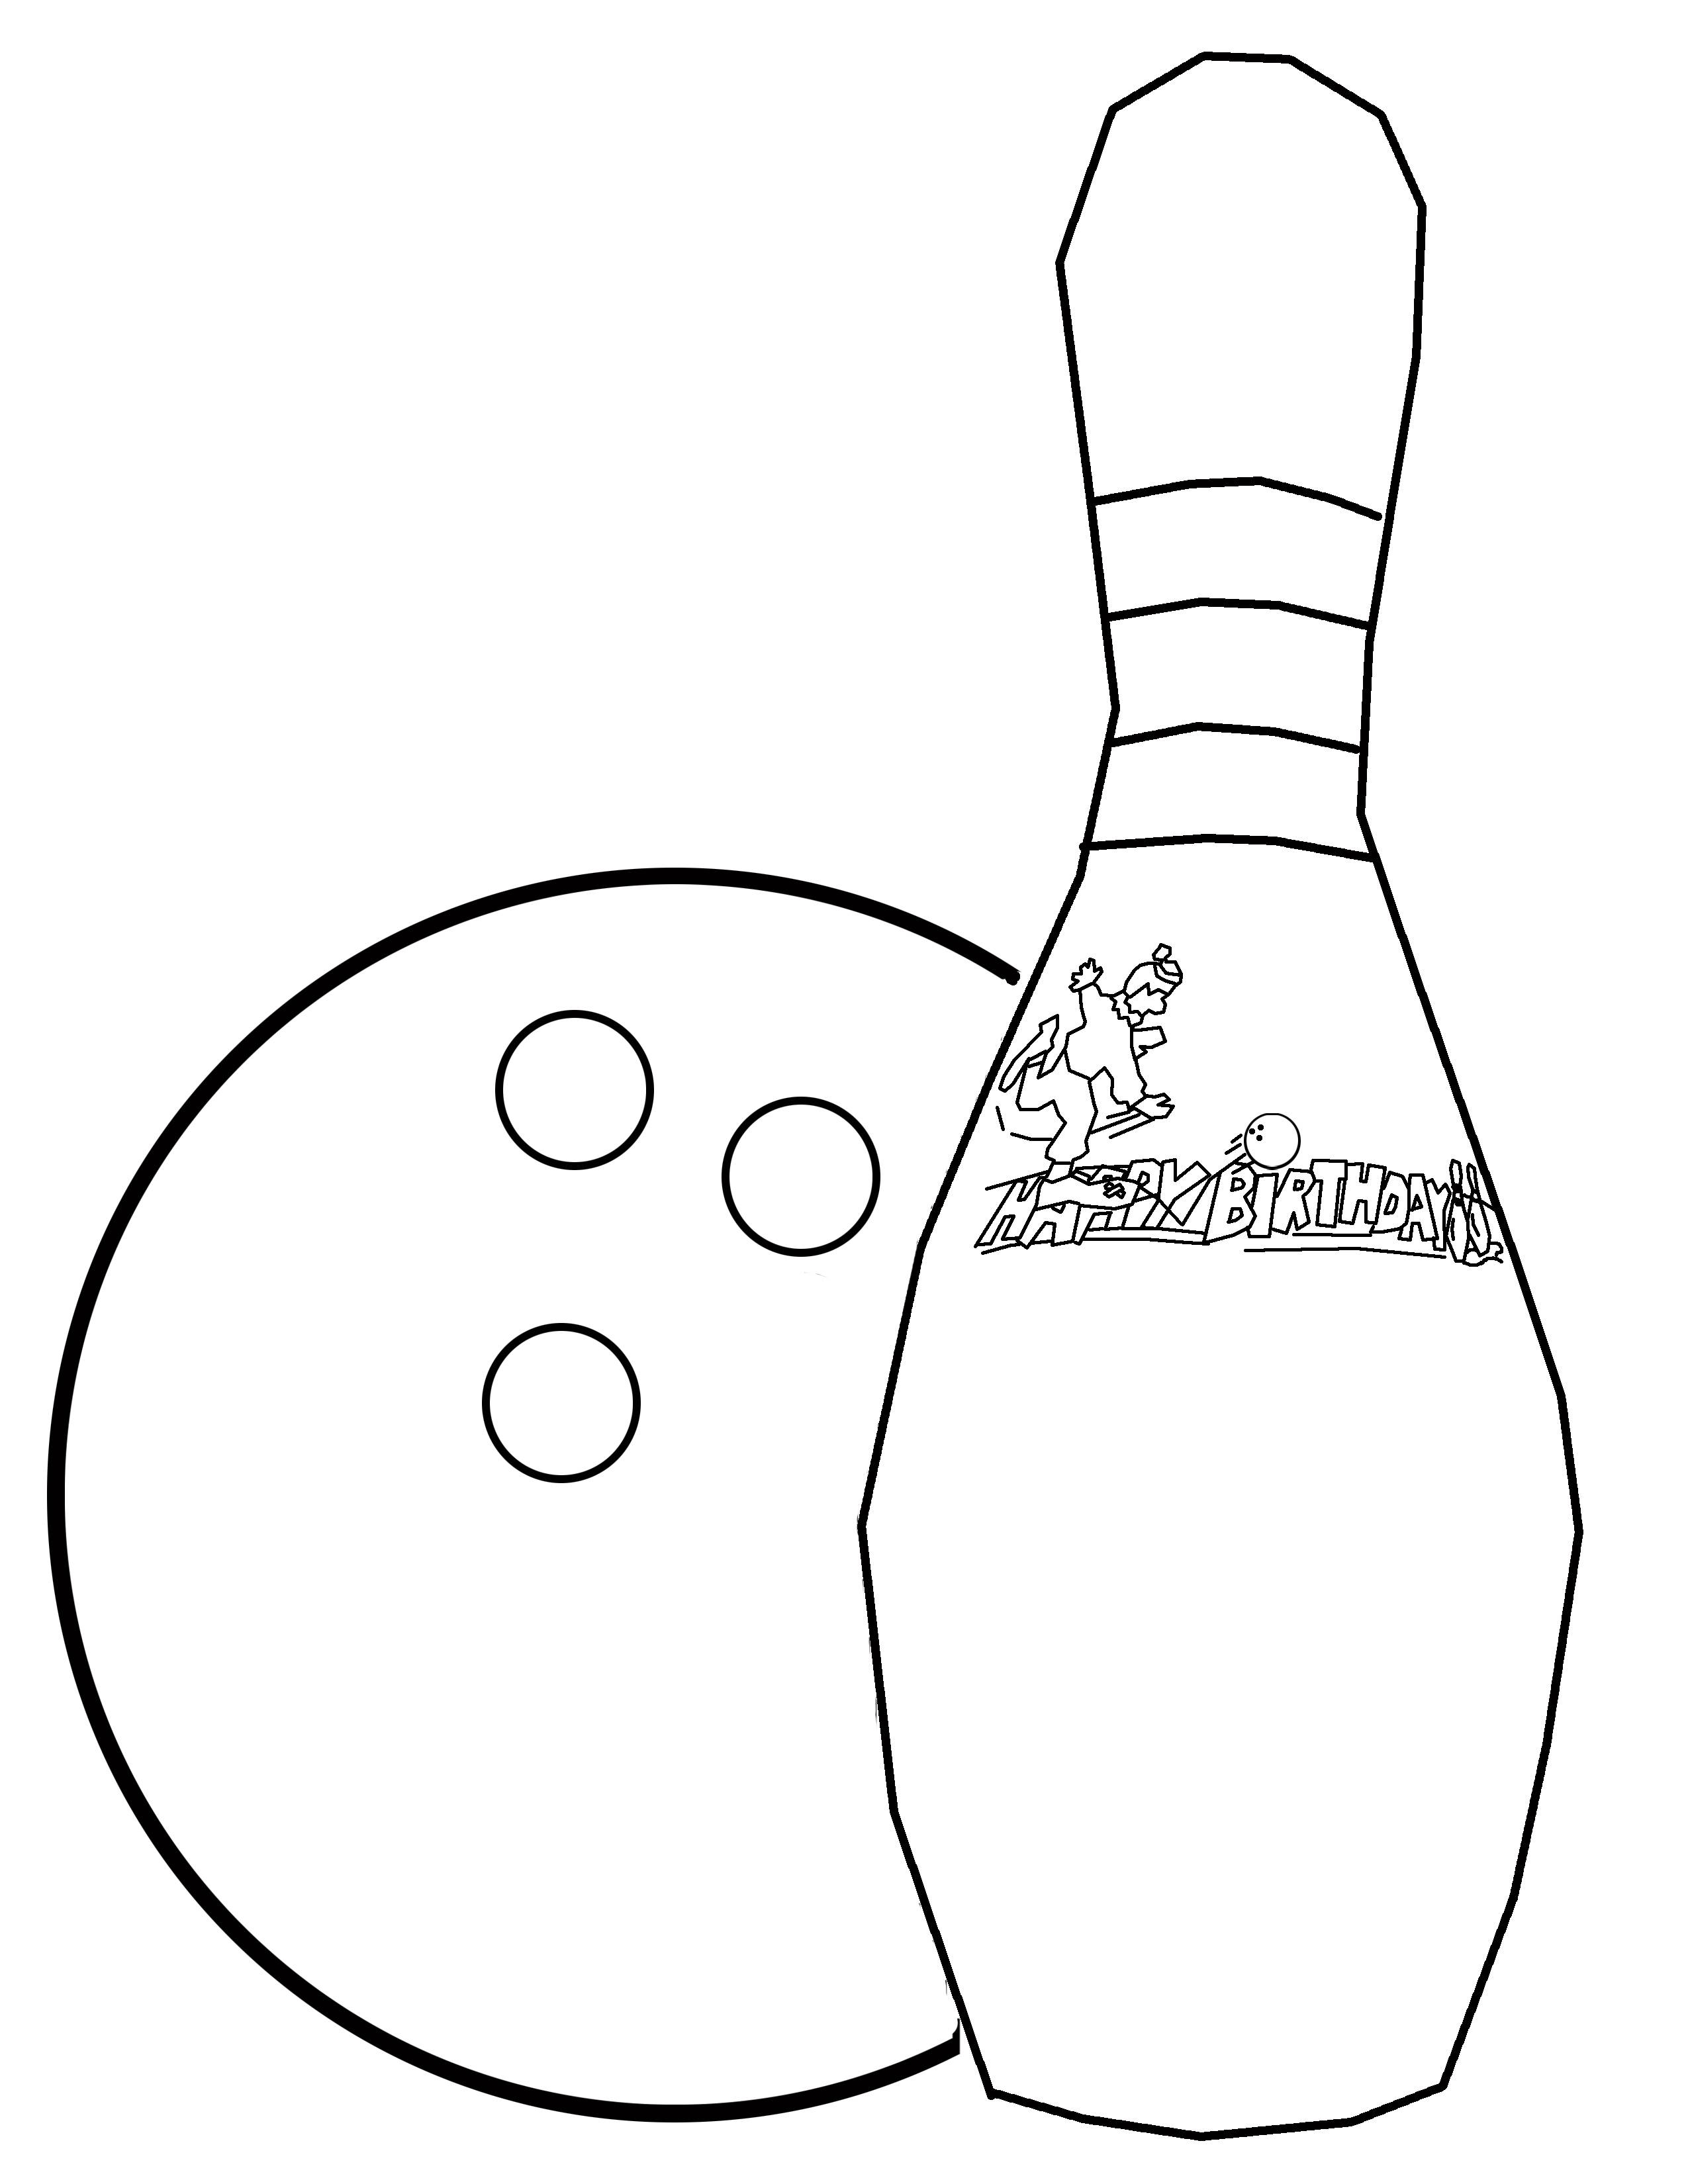 Free Bowling Pictures To Color Download Free Clip Art Free